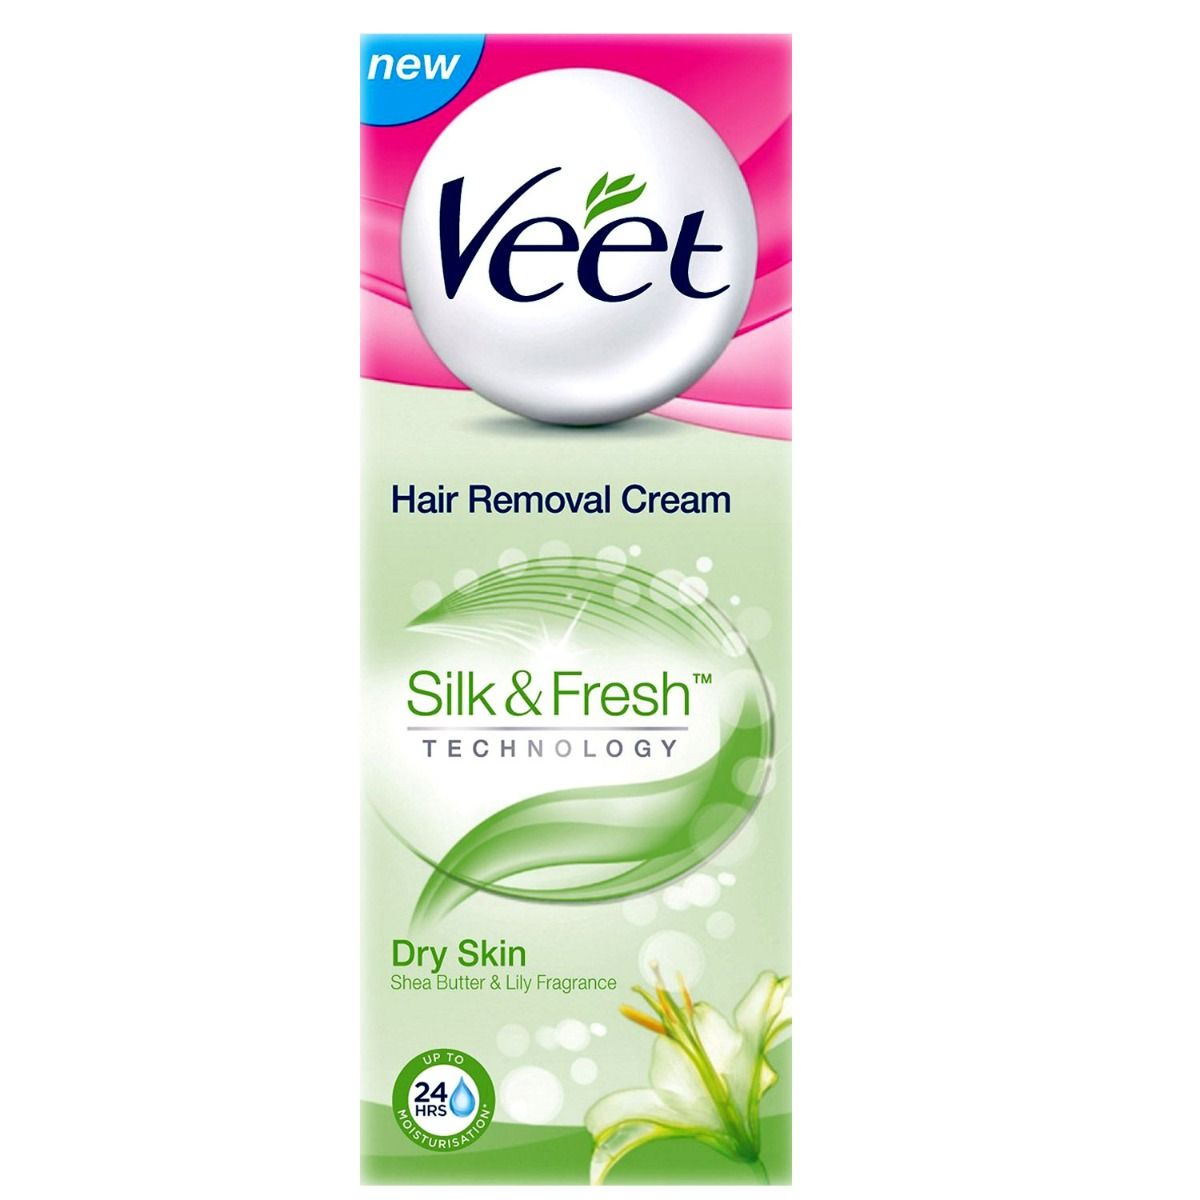 Veet Silk & Fresh Hair Removal Cream for Dry Skin, 25 gm Price, Uses, Side  Effects, Composition - Apollo Pharmacy